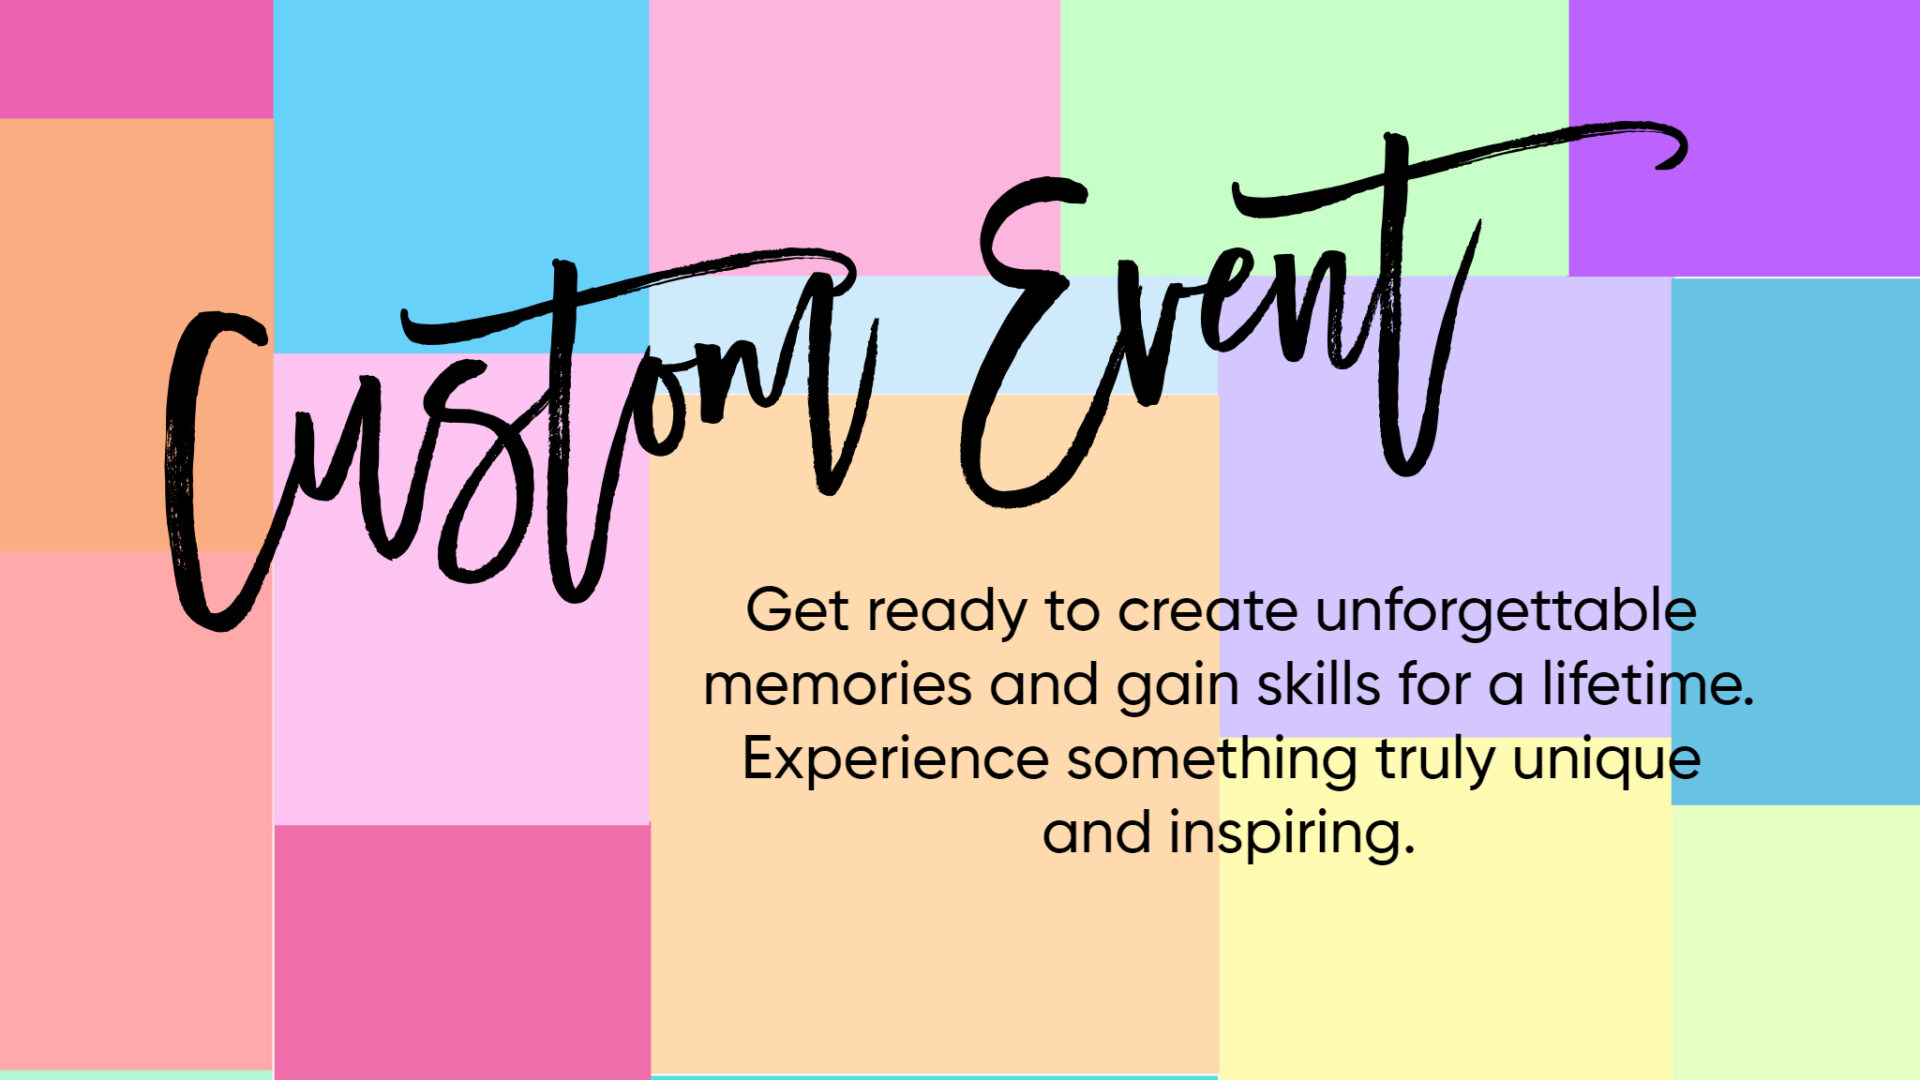 A colorful background with the words custom event written in black.